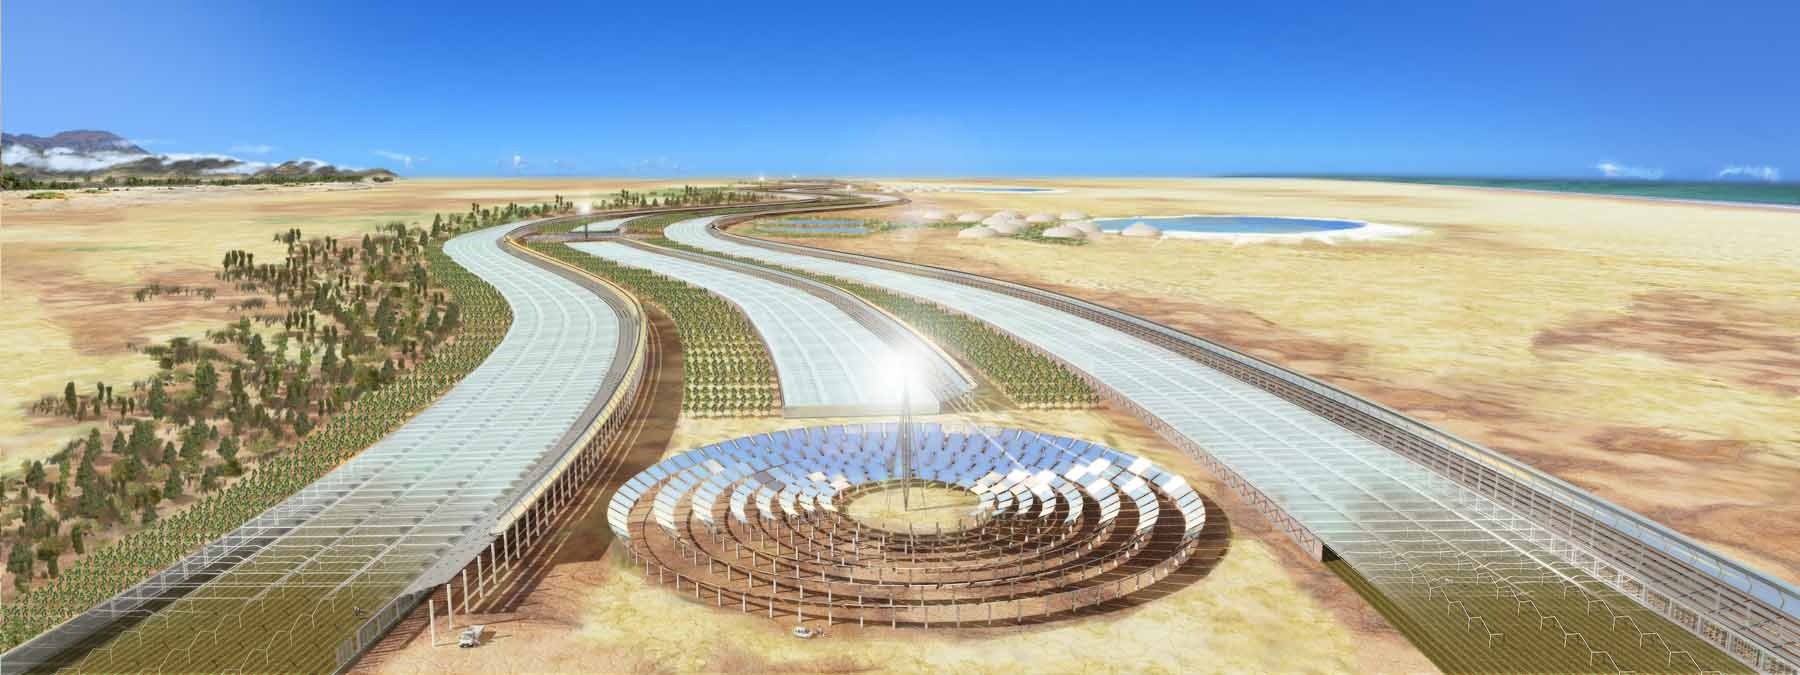 Sahara Forest Project